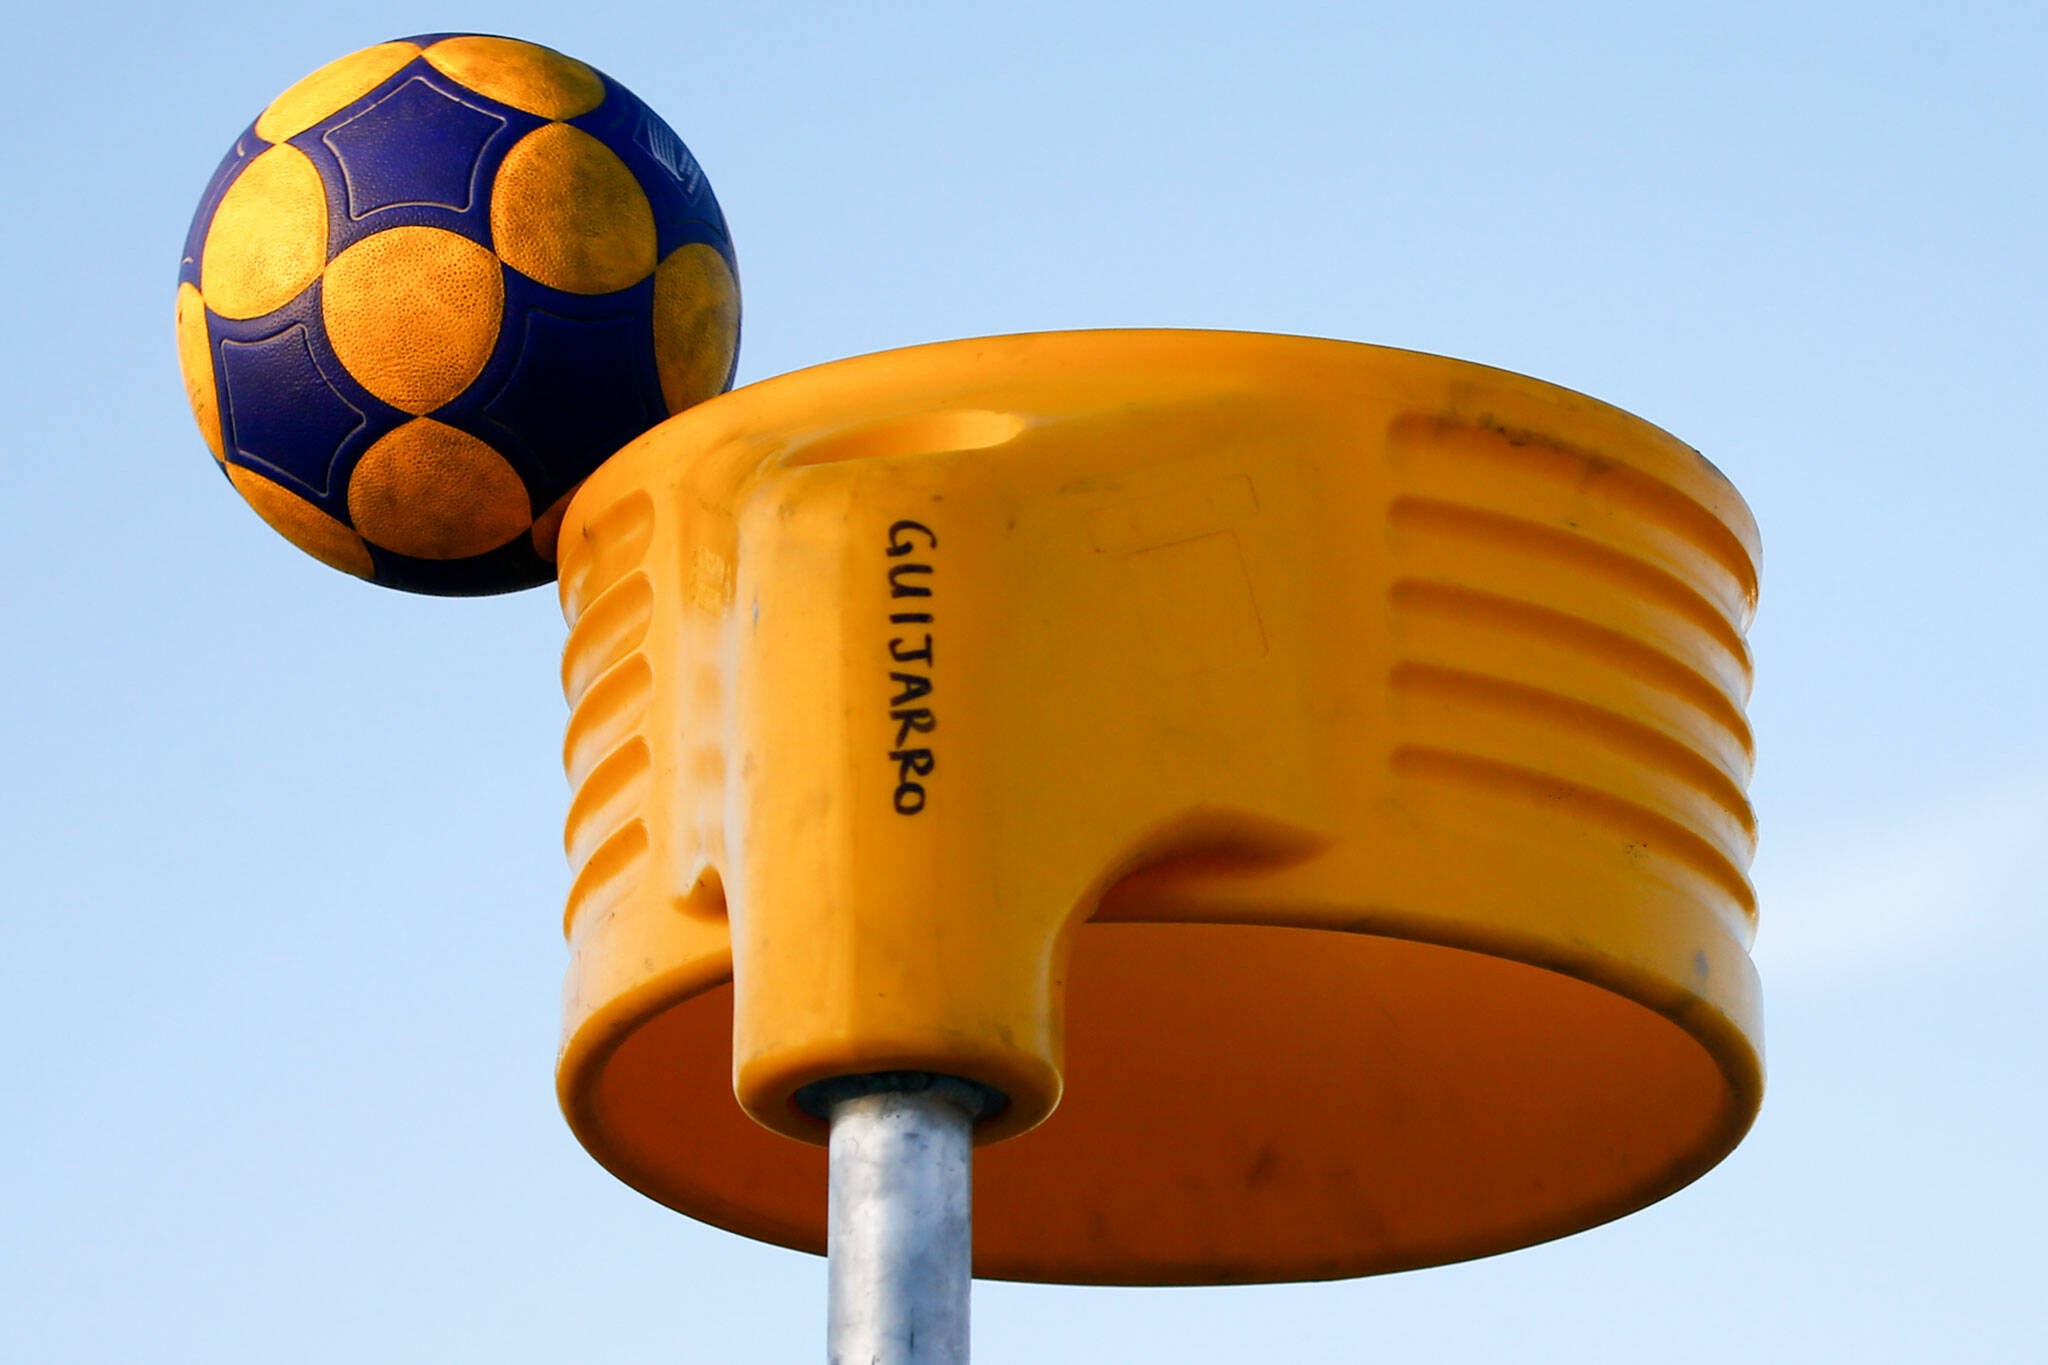 A korfball hits the edge of the basket Sept. 9 at Mukilteo Beach. (Kevin Clark / The Herald)